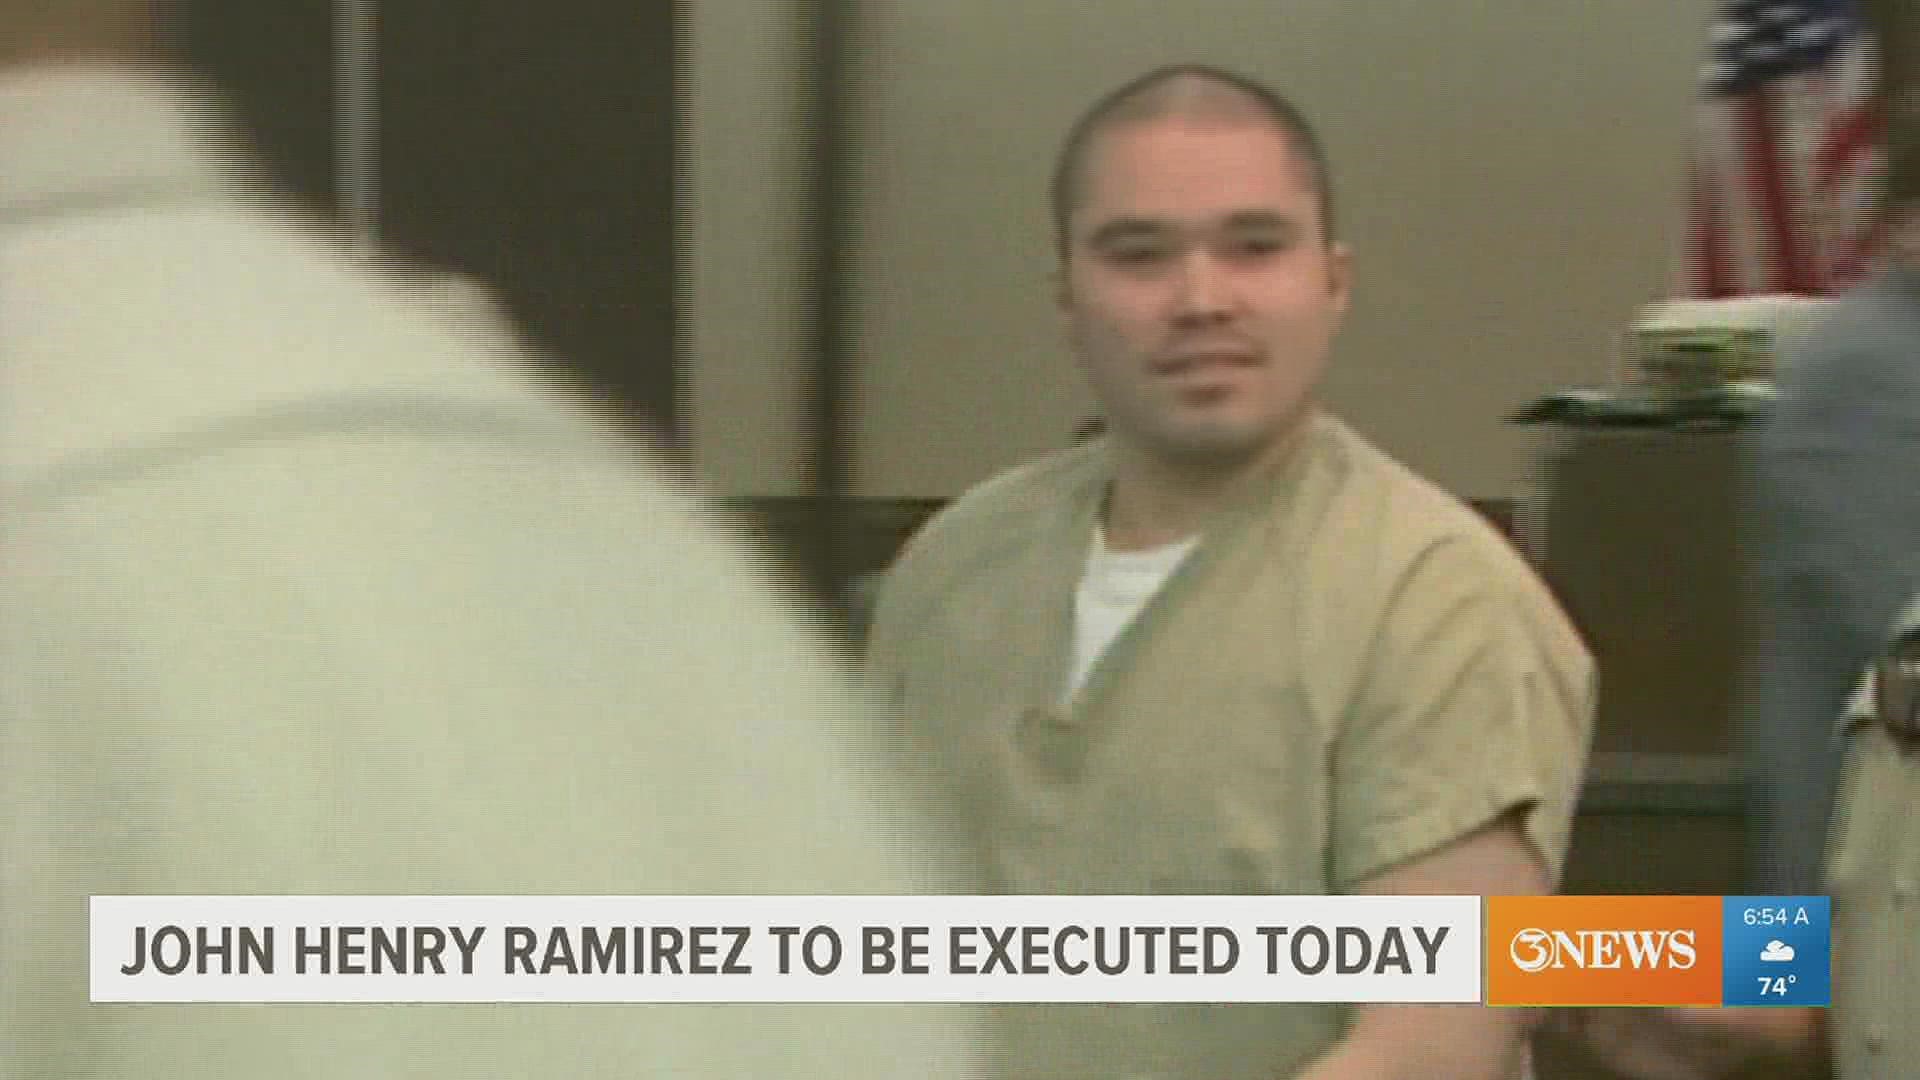 The Supreme Court ruled in March that Ramirez can have a pastor pray over him in his death chamber during the execution.